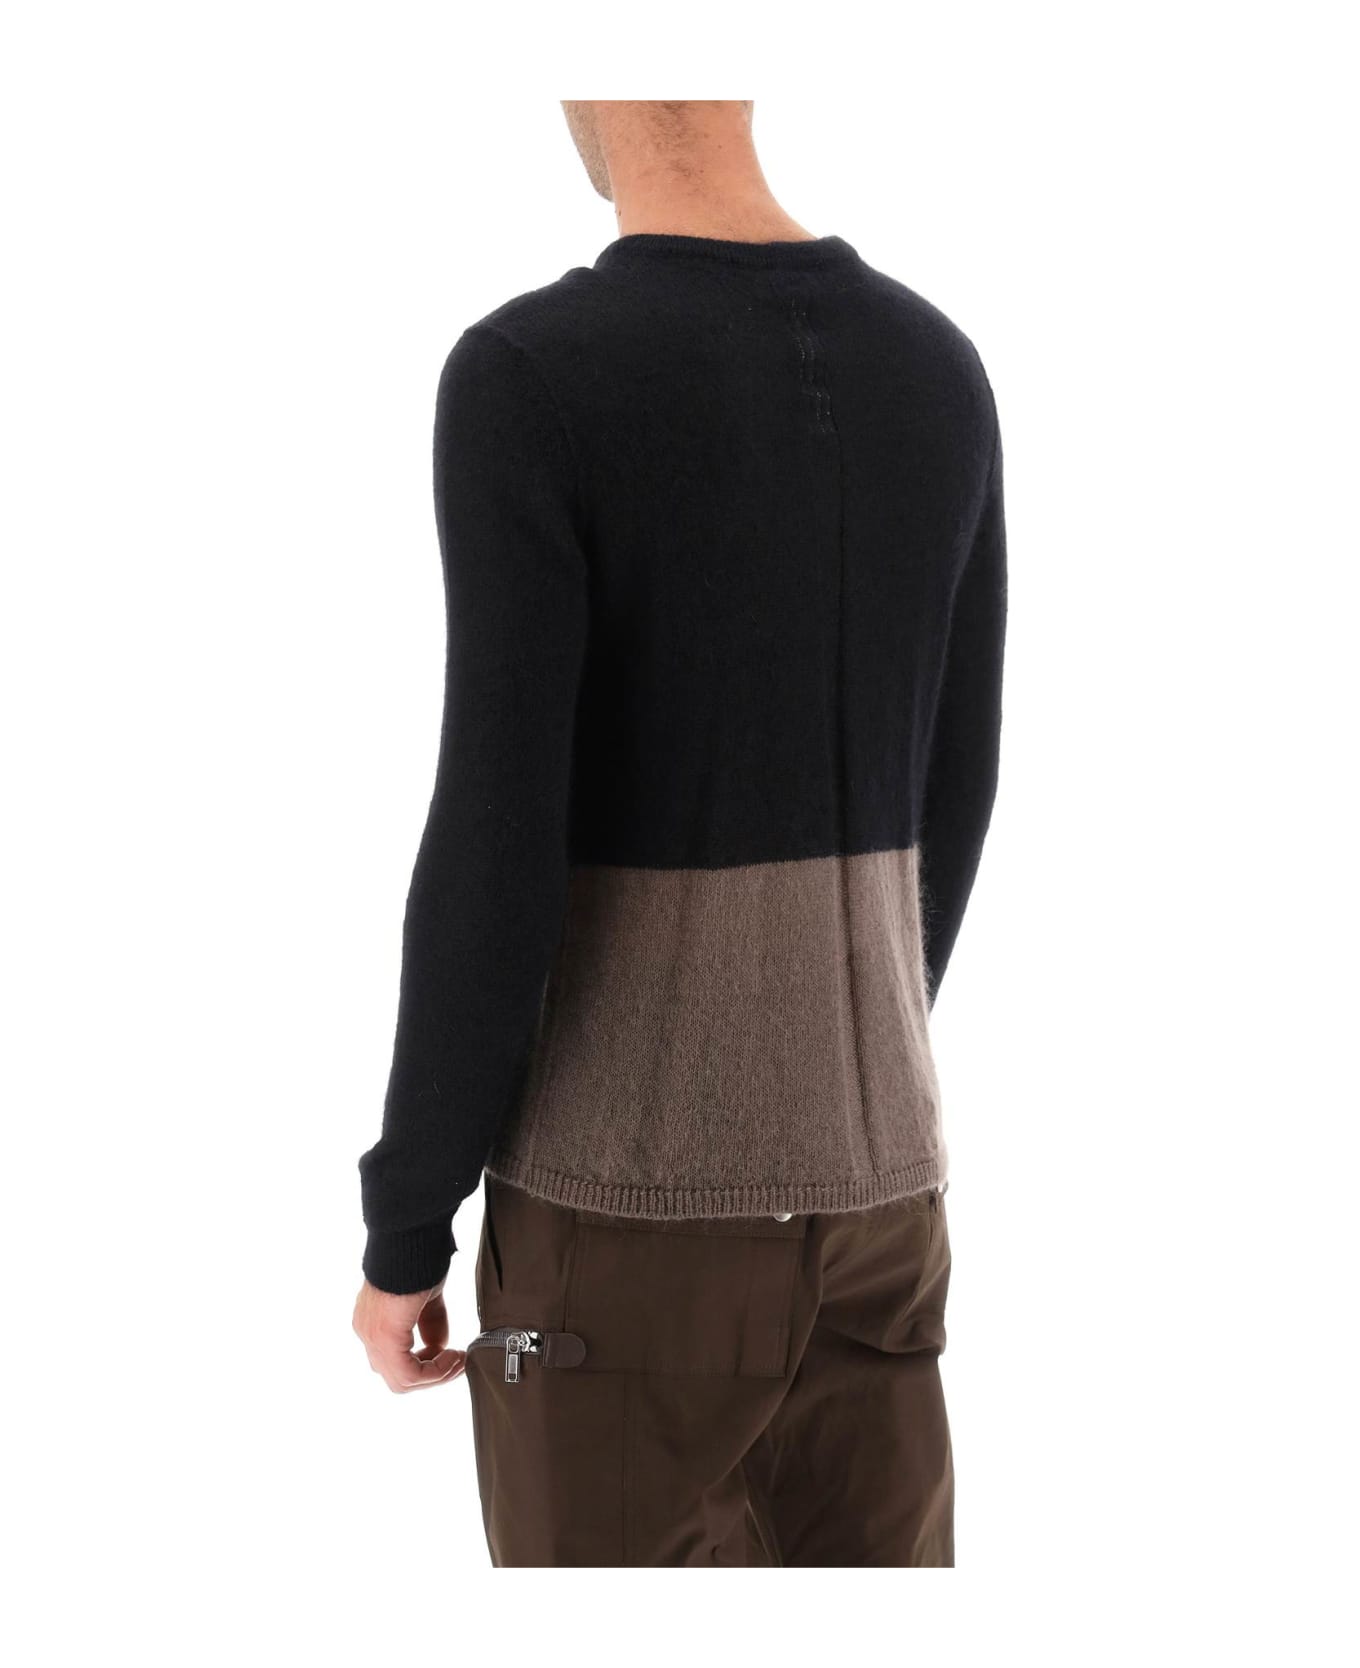 Rick Owens 'judd' Sweater With Contrasting Lines - BLACK DUST PEARL (Black)